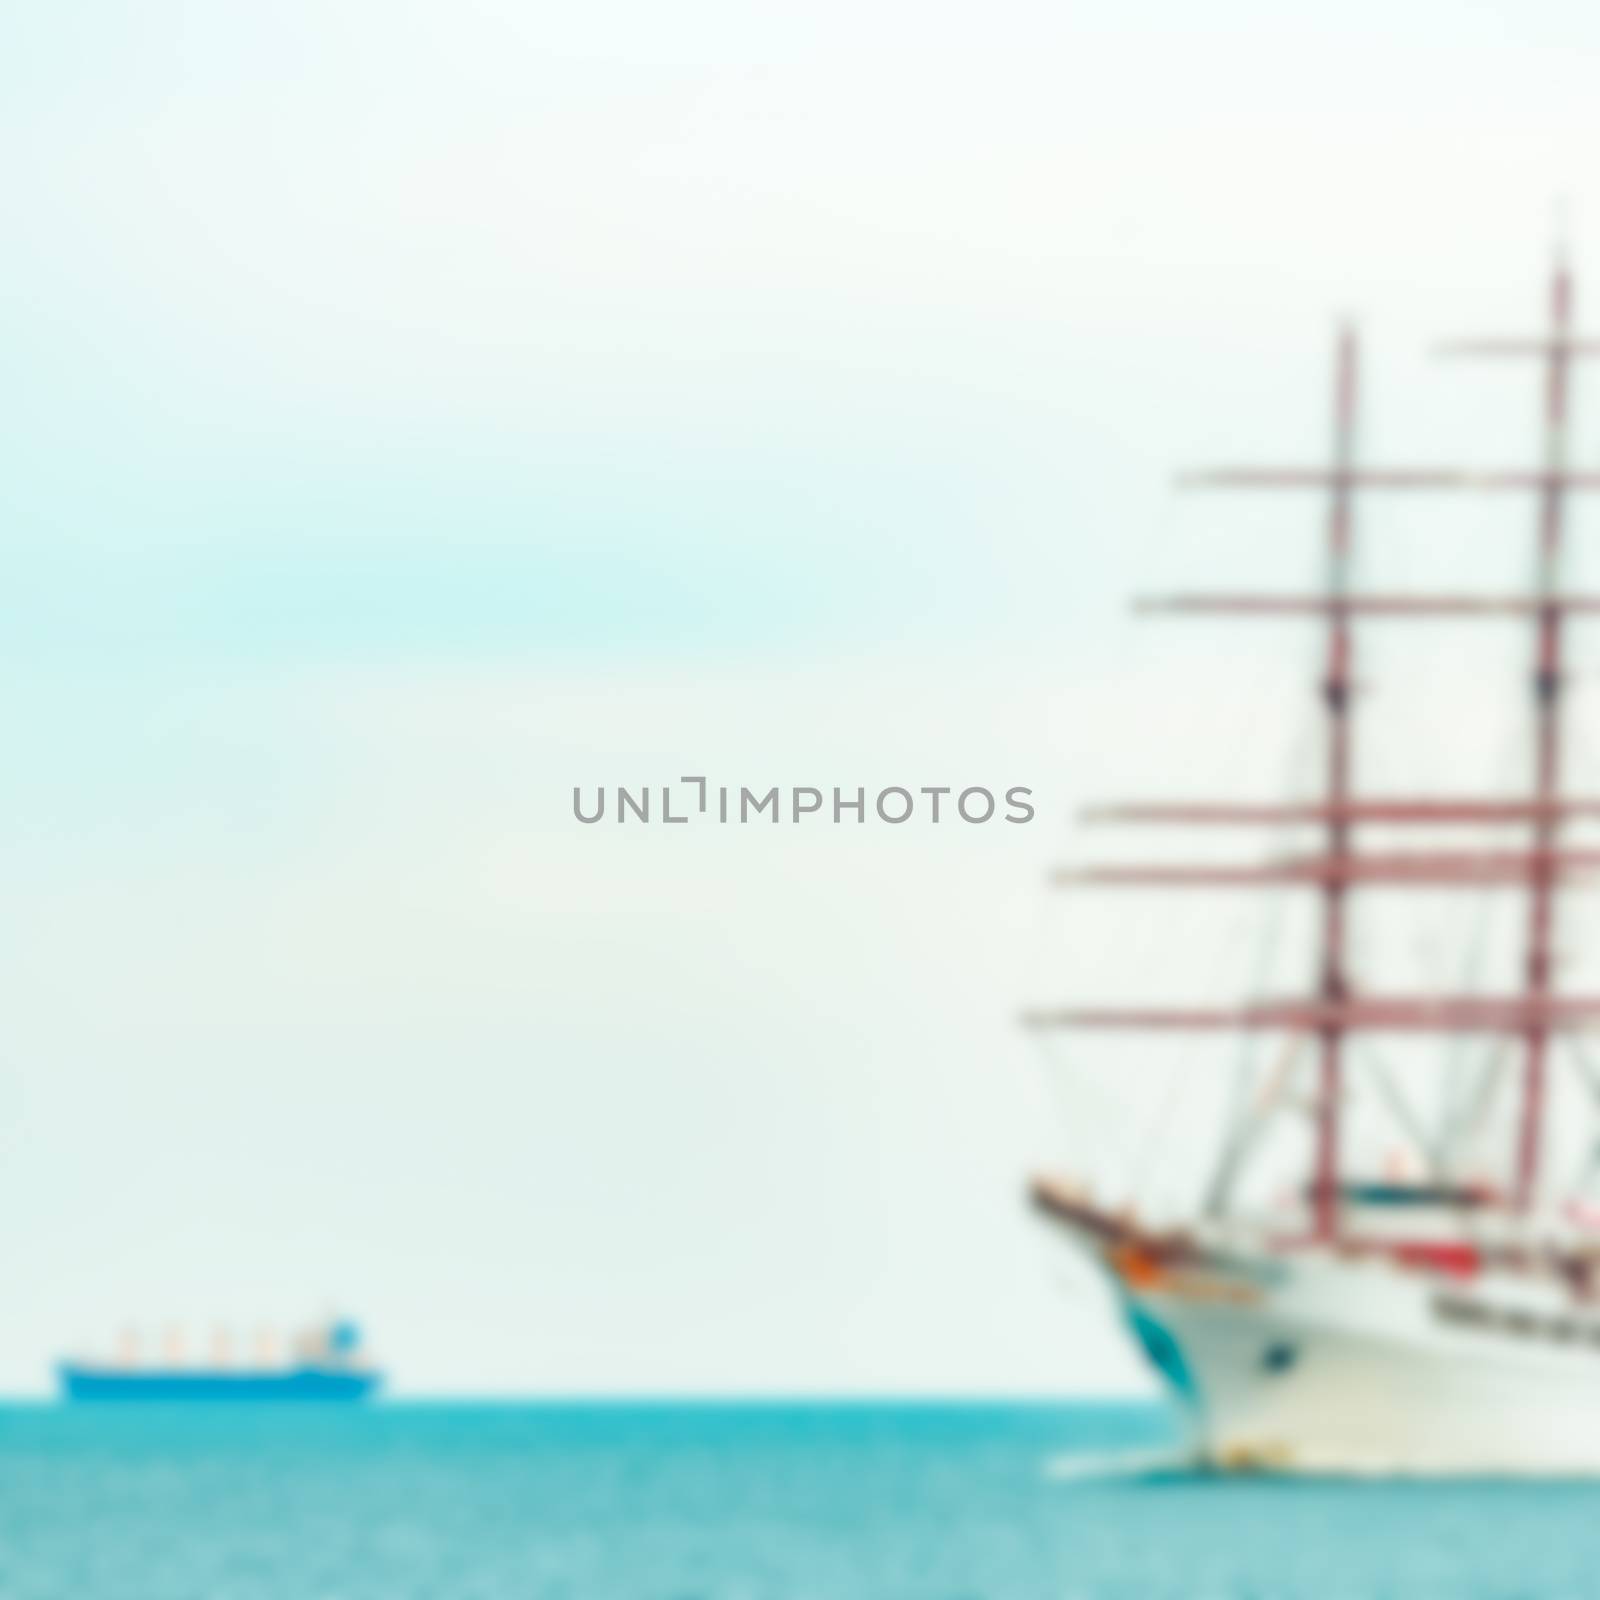 White sailing ship - blurred image by sengnsp